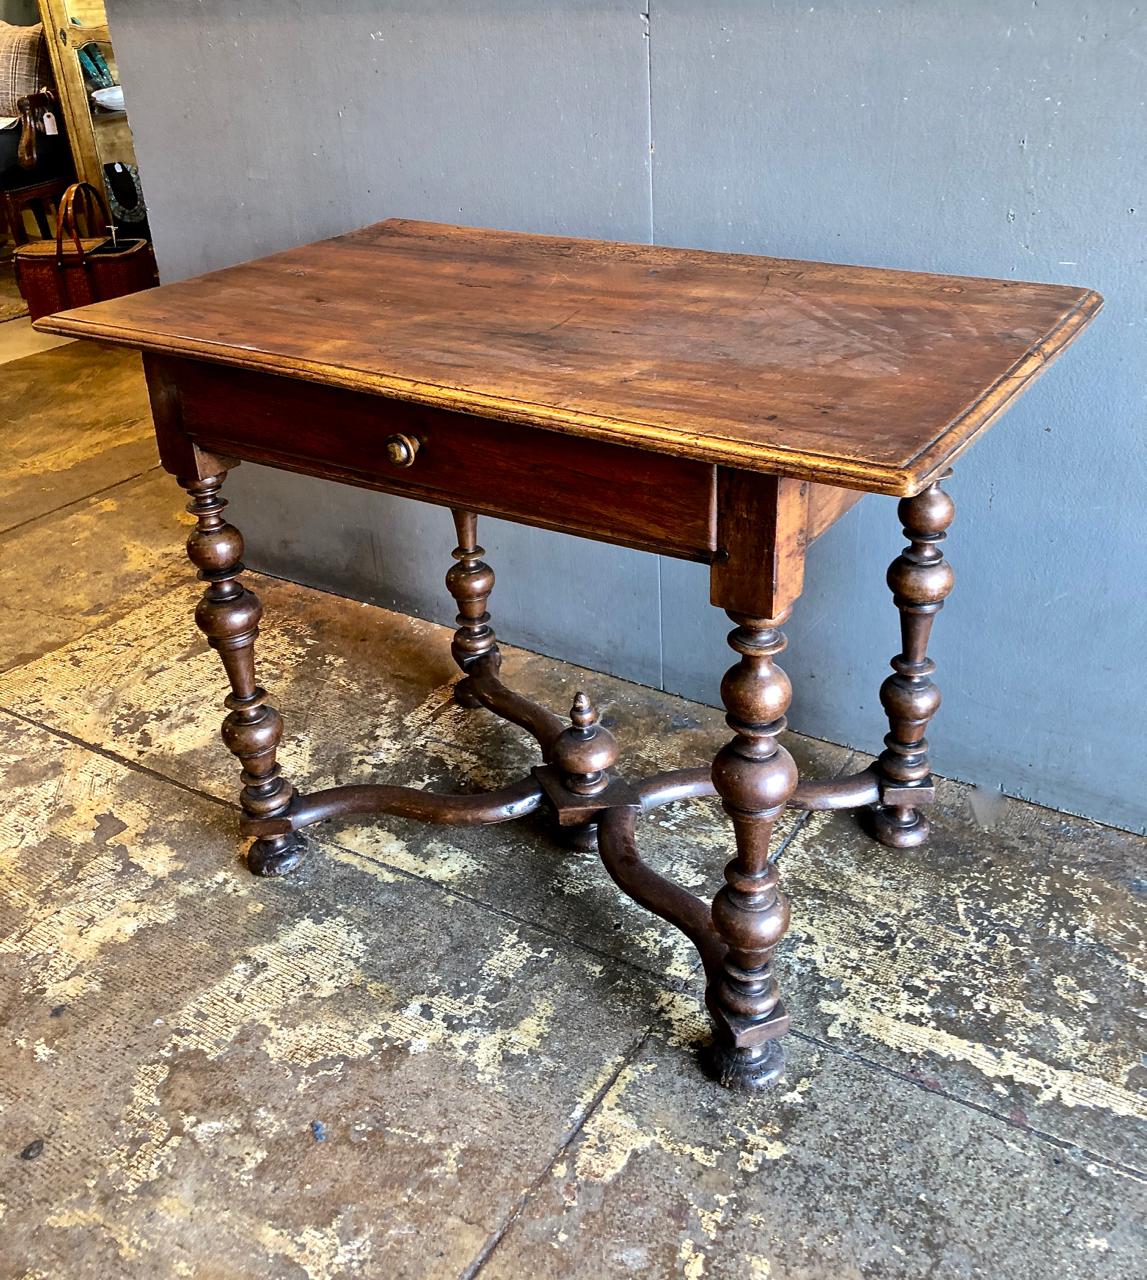 This is a good example of a Late Baroque Flemish (Netherlands) side or writing table, circa 1700. The table is crafted of solid walnut, features beautifully turned legs, serpentine stretcher, and center finial. There are some restorations to the